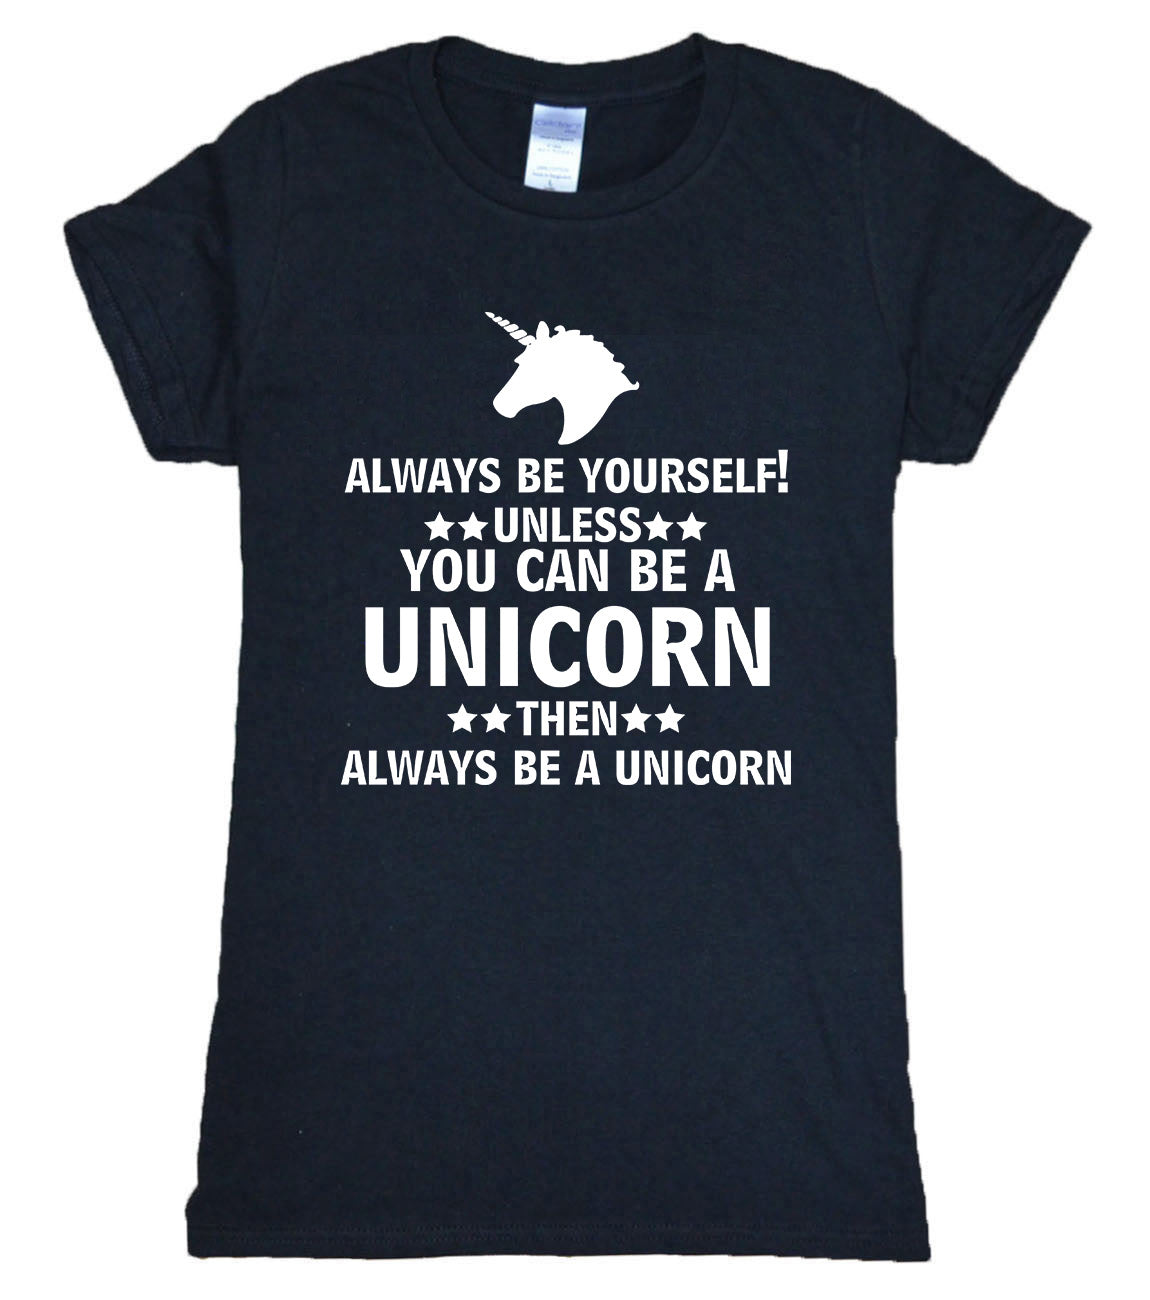 Unless You Can Be a Unicorn - Premium Unisex T-Shirt